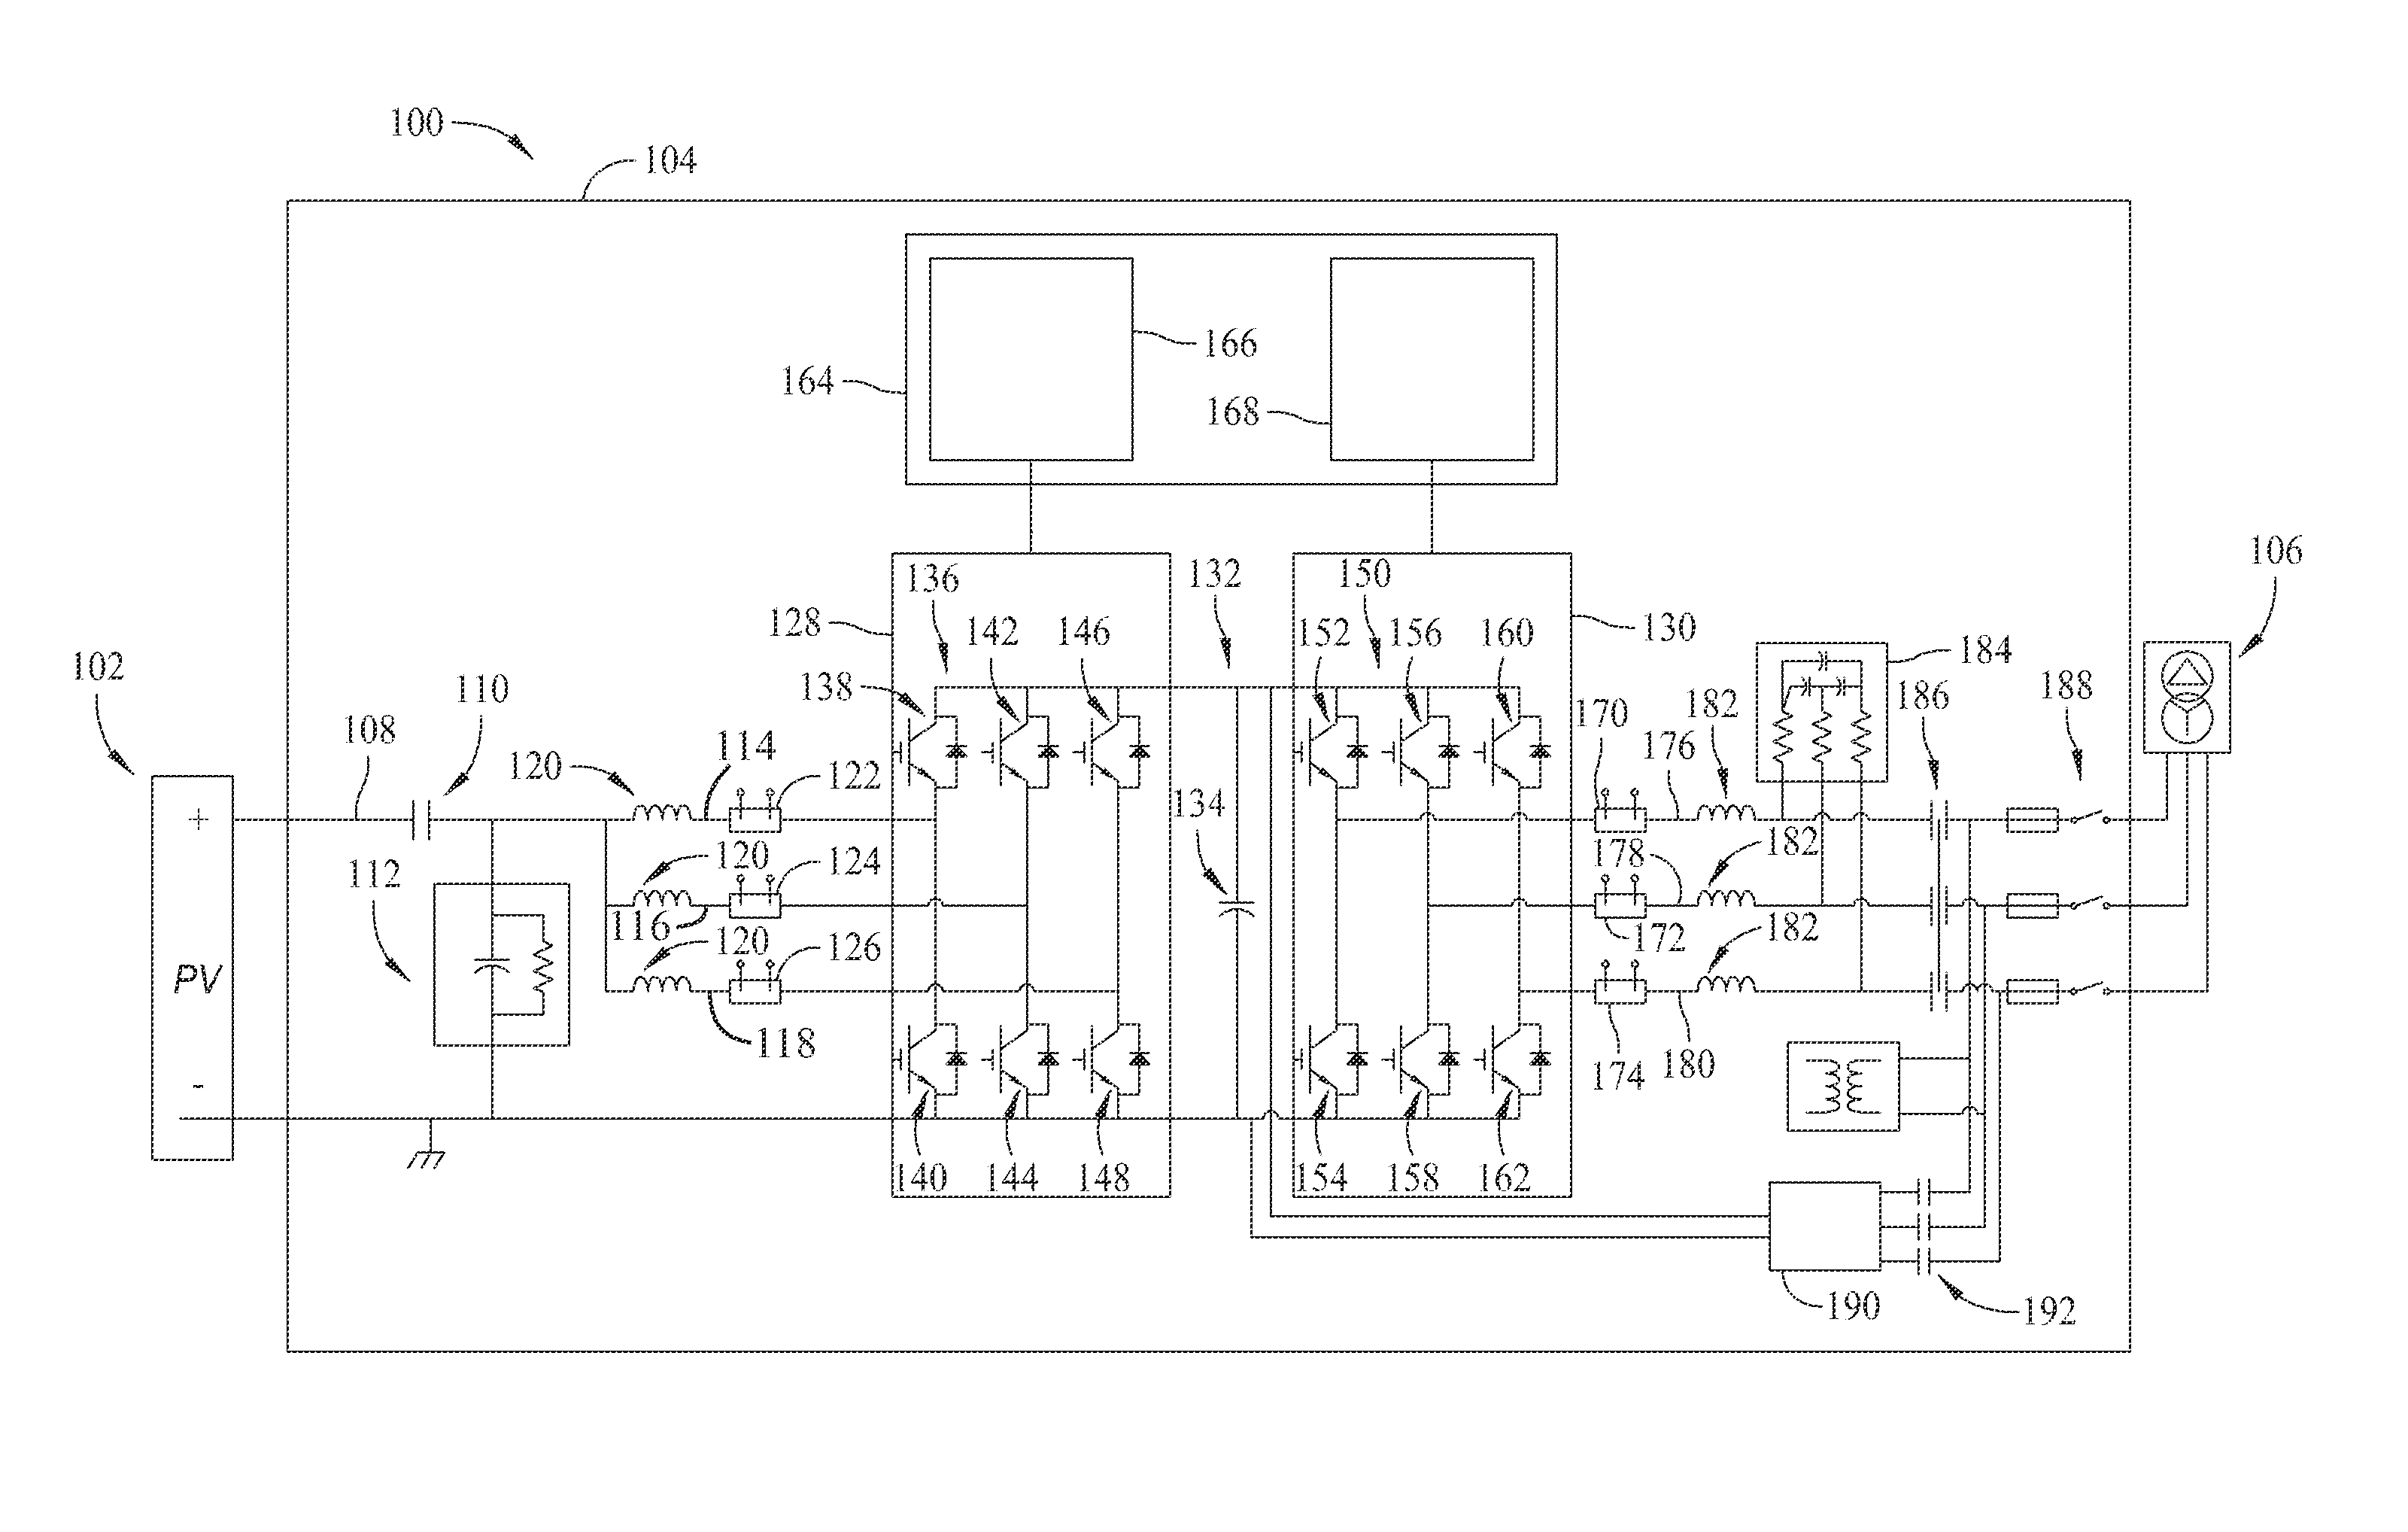 Power converter system and methods of operating a power converter system